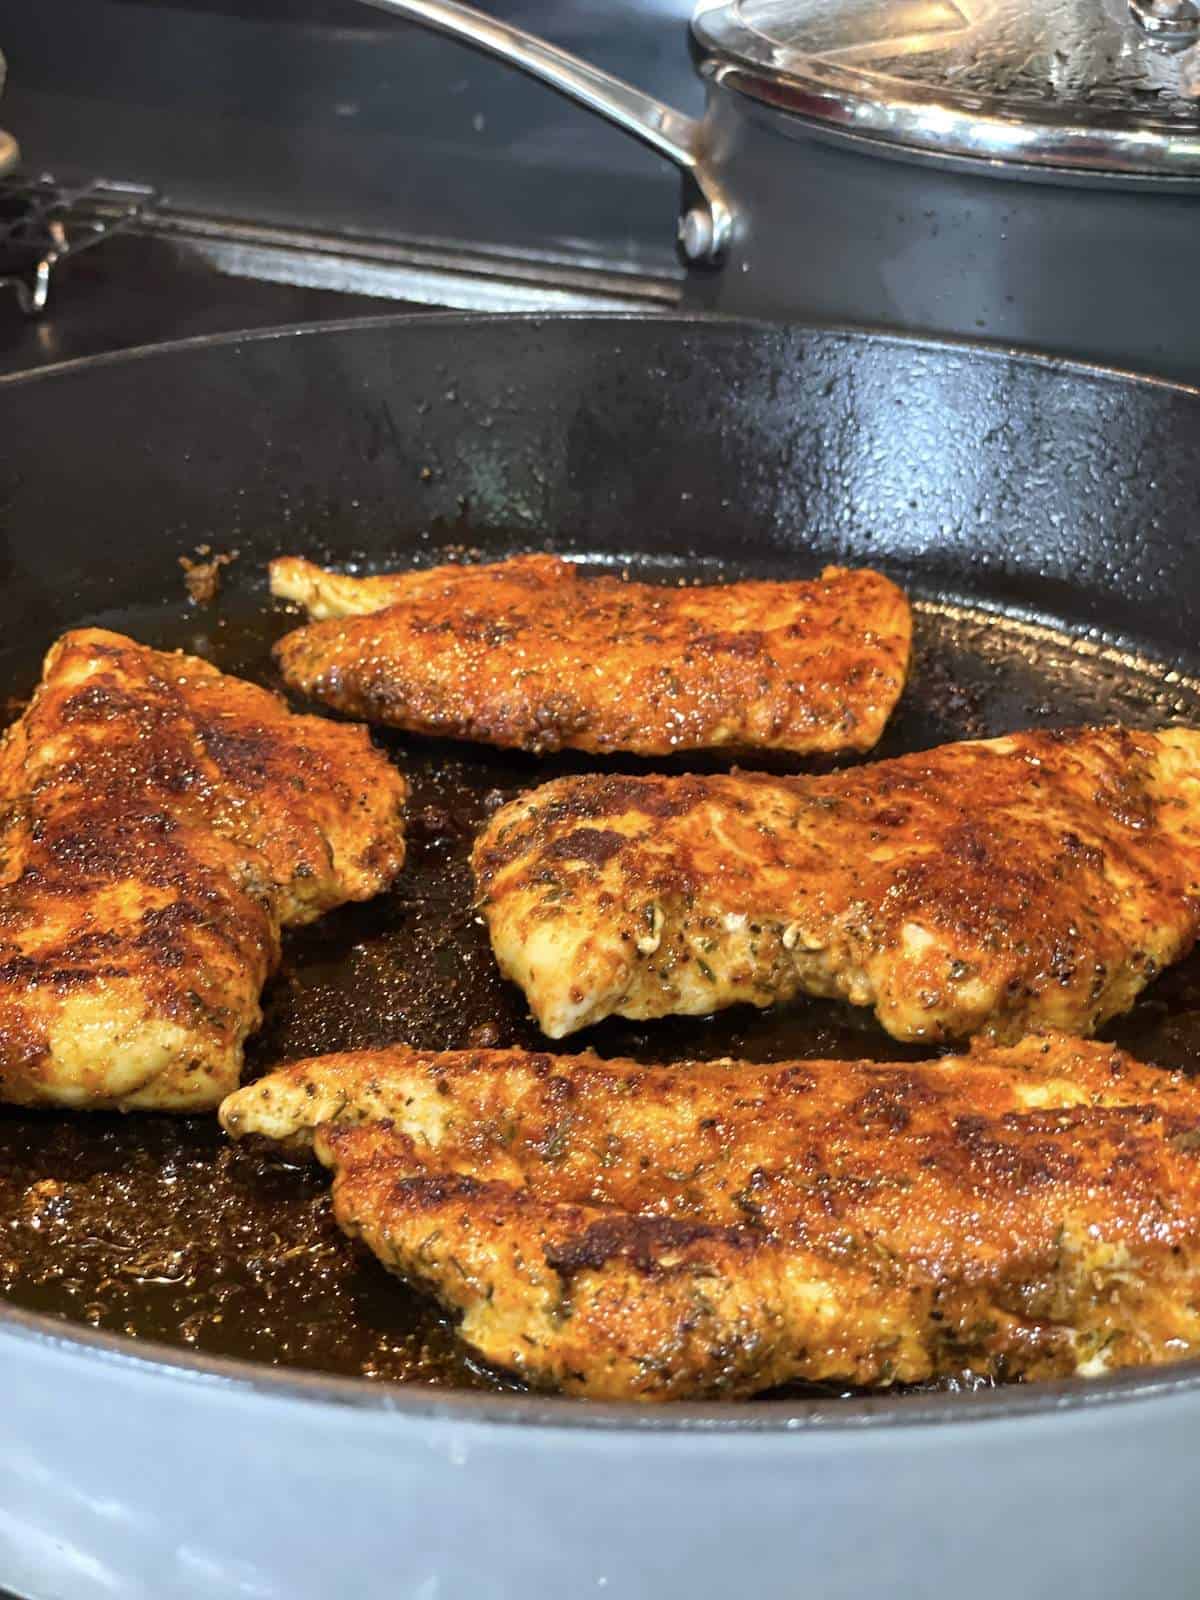 Chicken breasts cooking in a cast iron skillet.